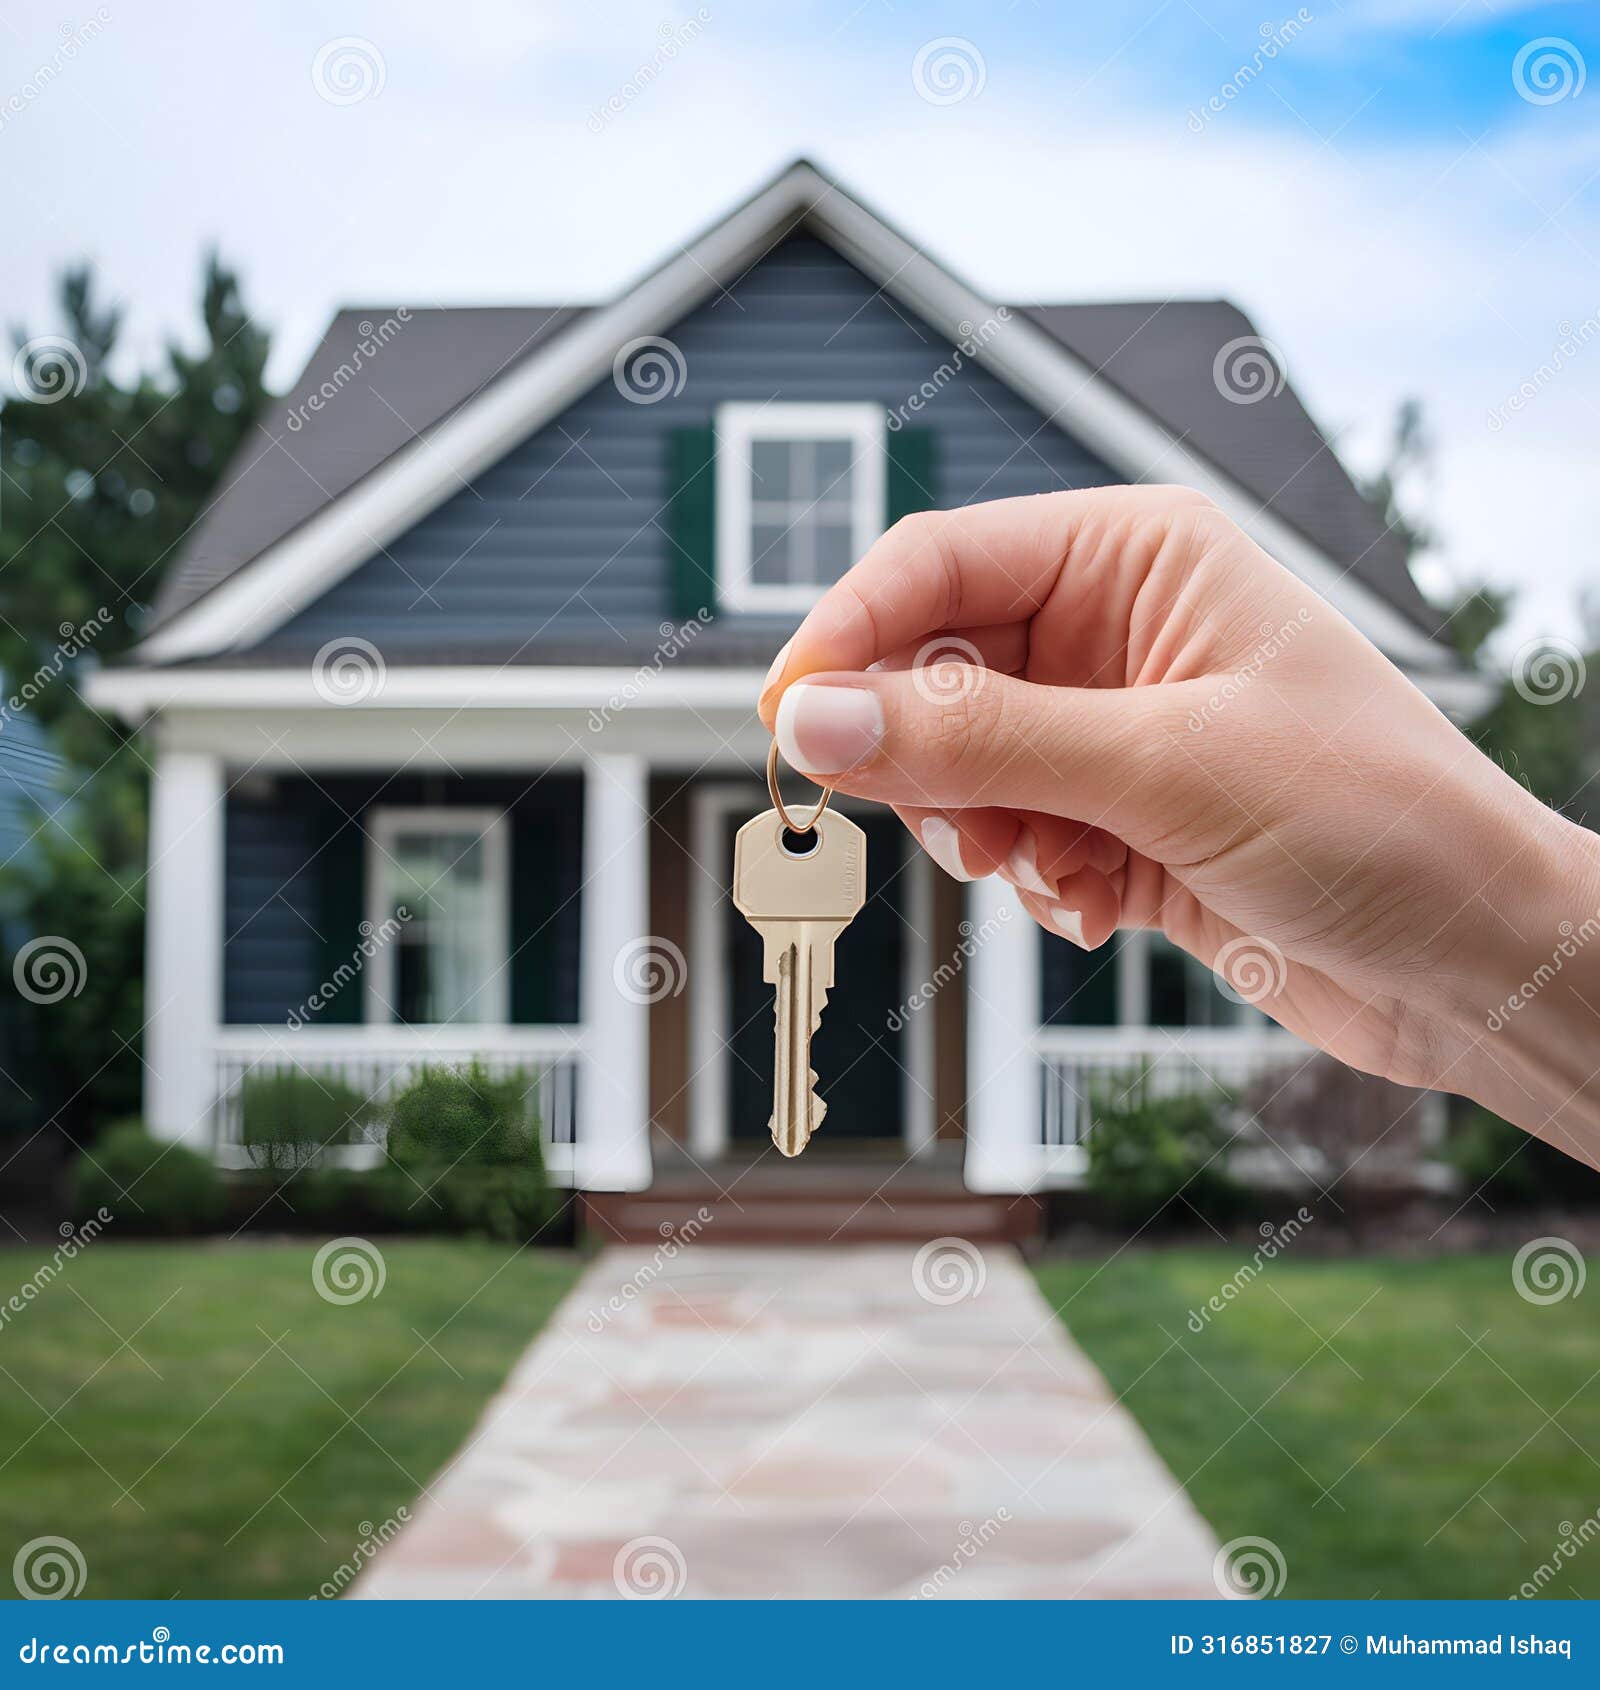 stockphoto hand holds key in front of house, izing new home